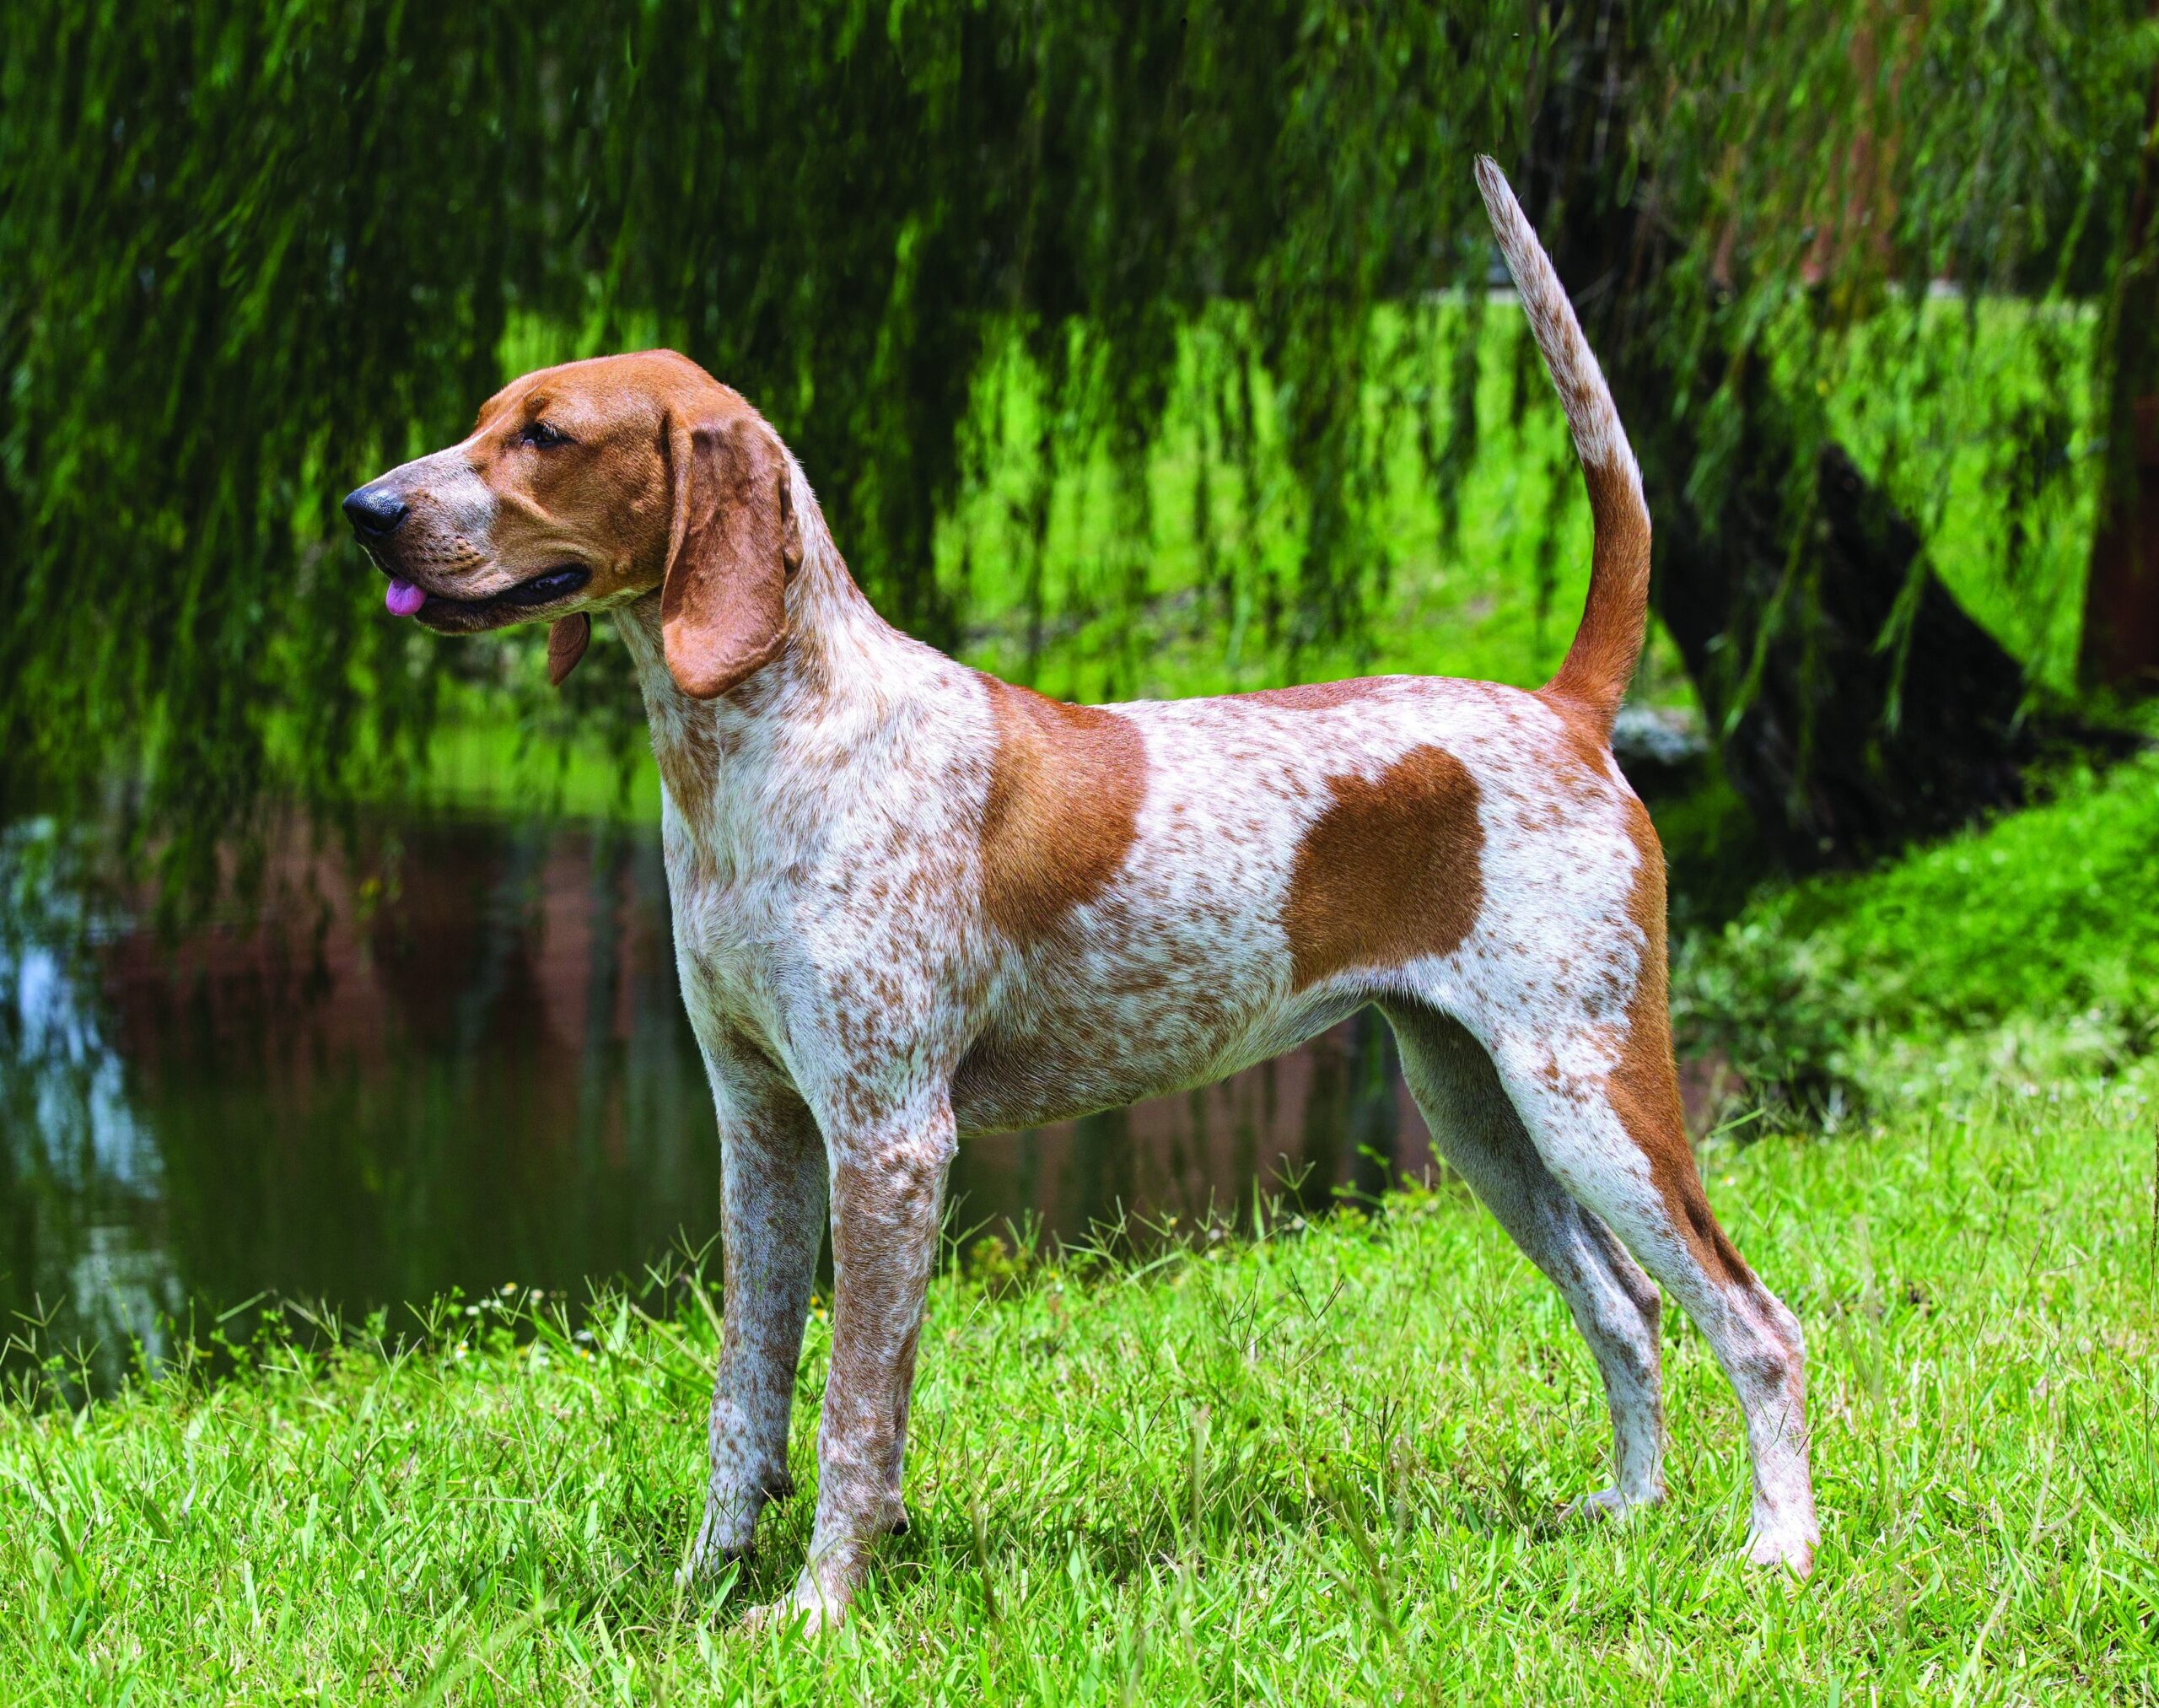 American English Coonhound Dog Breed Information